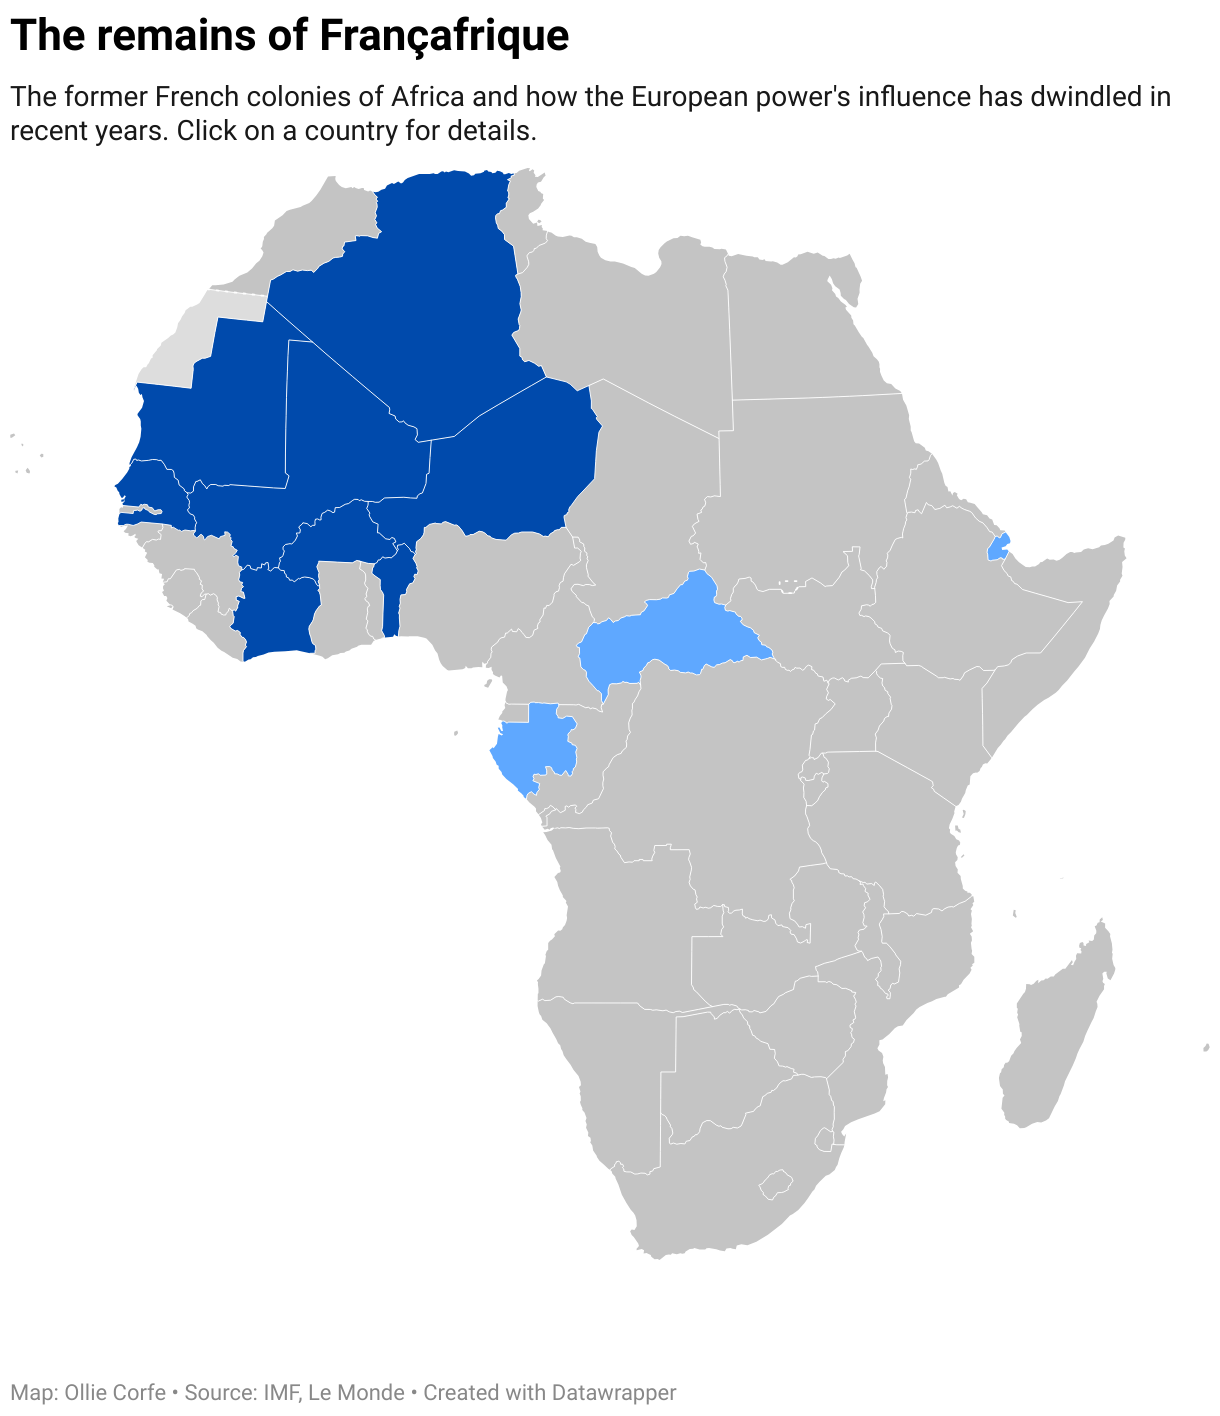 Map of French influence in Africa.